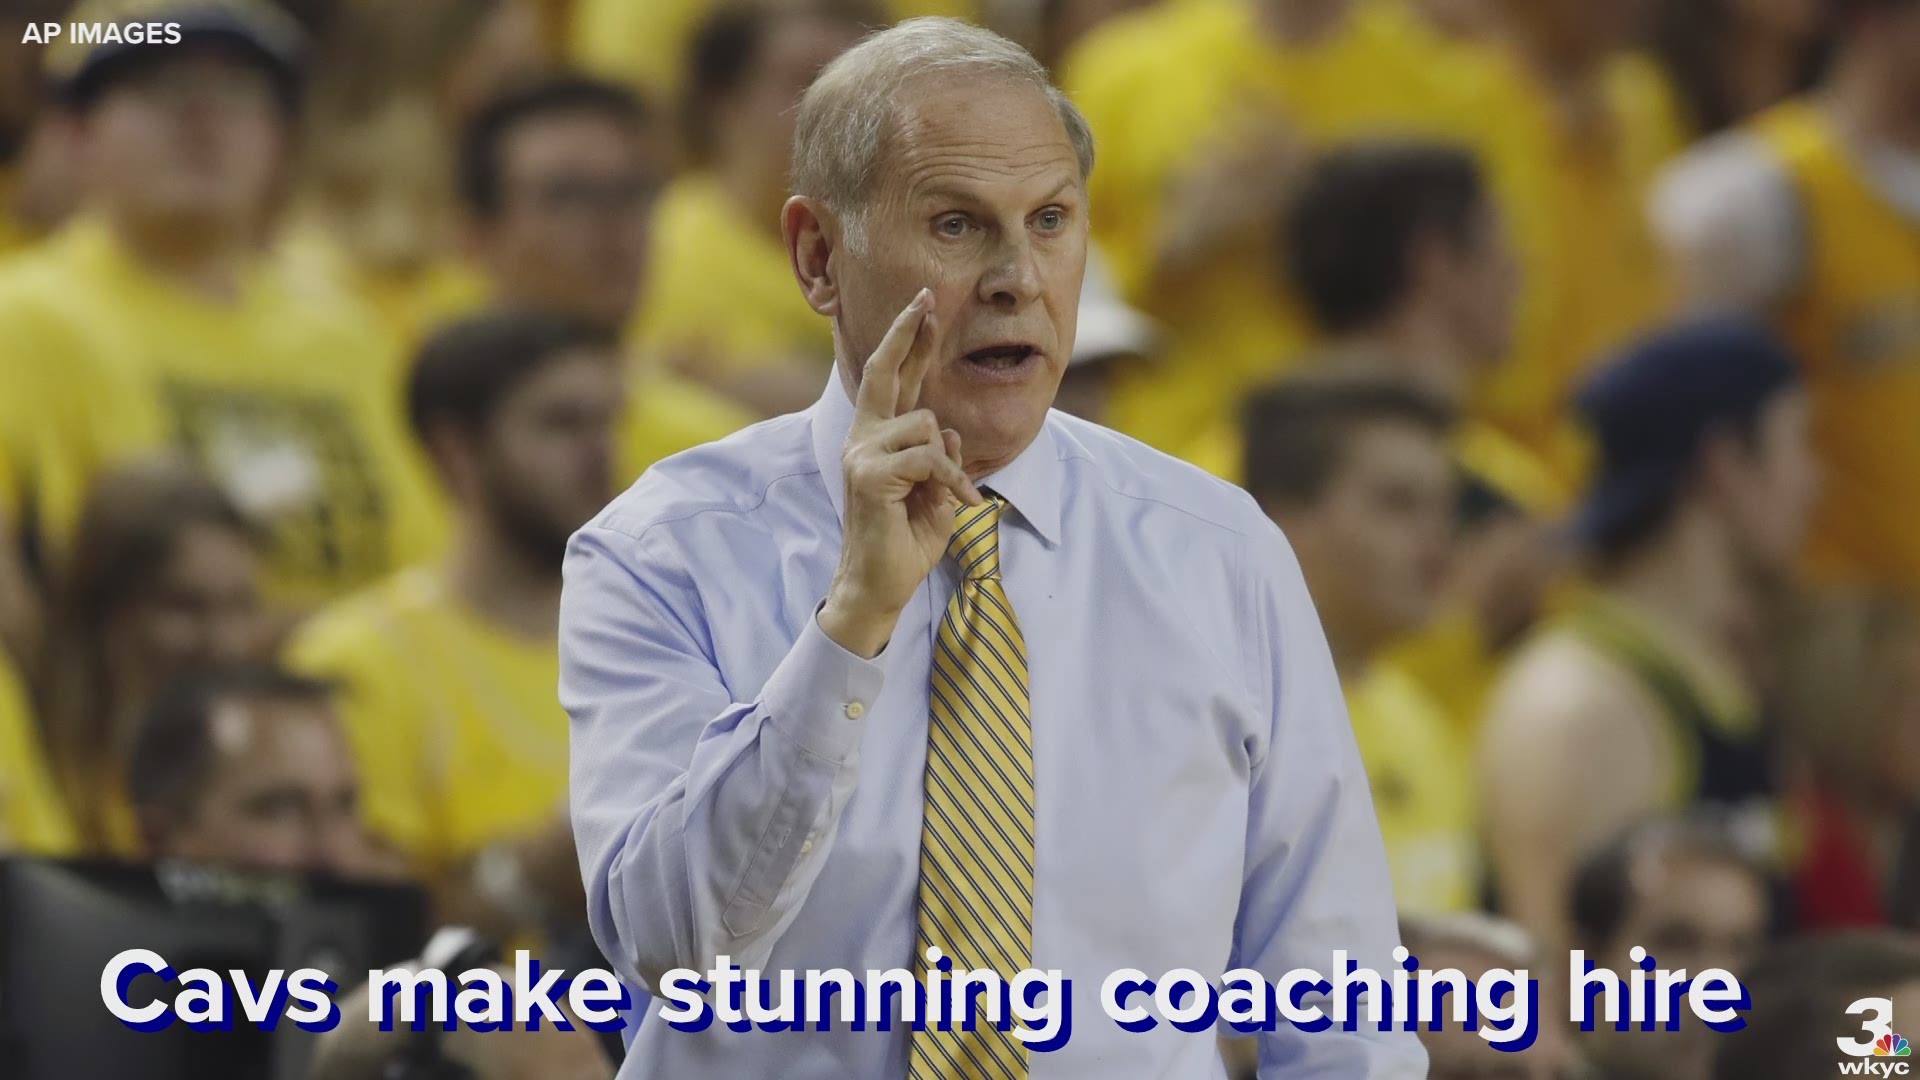 The Cleveland Cavaliers have hired Michigan head coach John Beilein to be their new head coach.